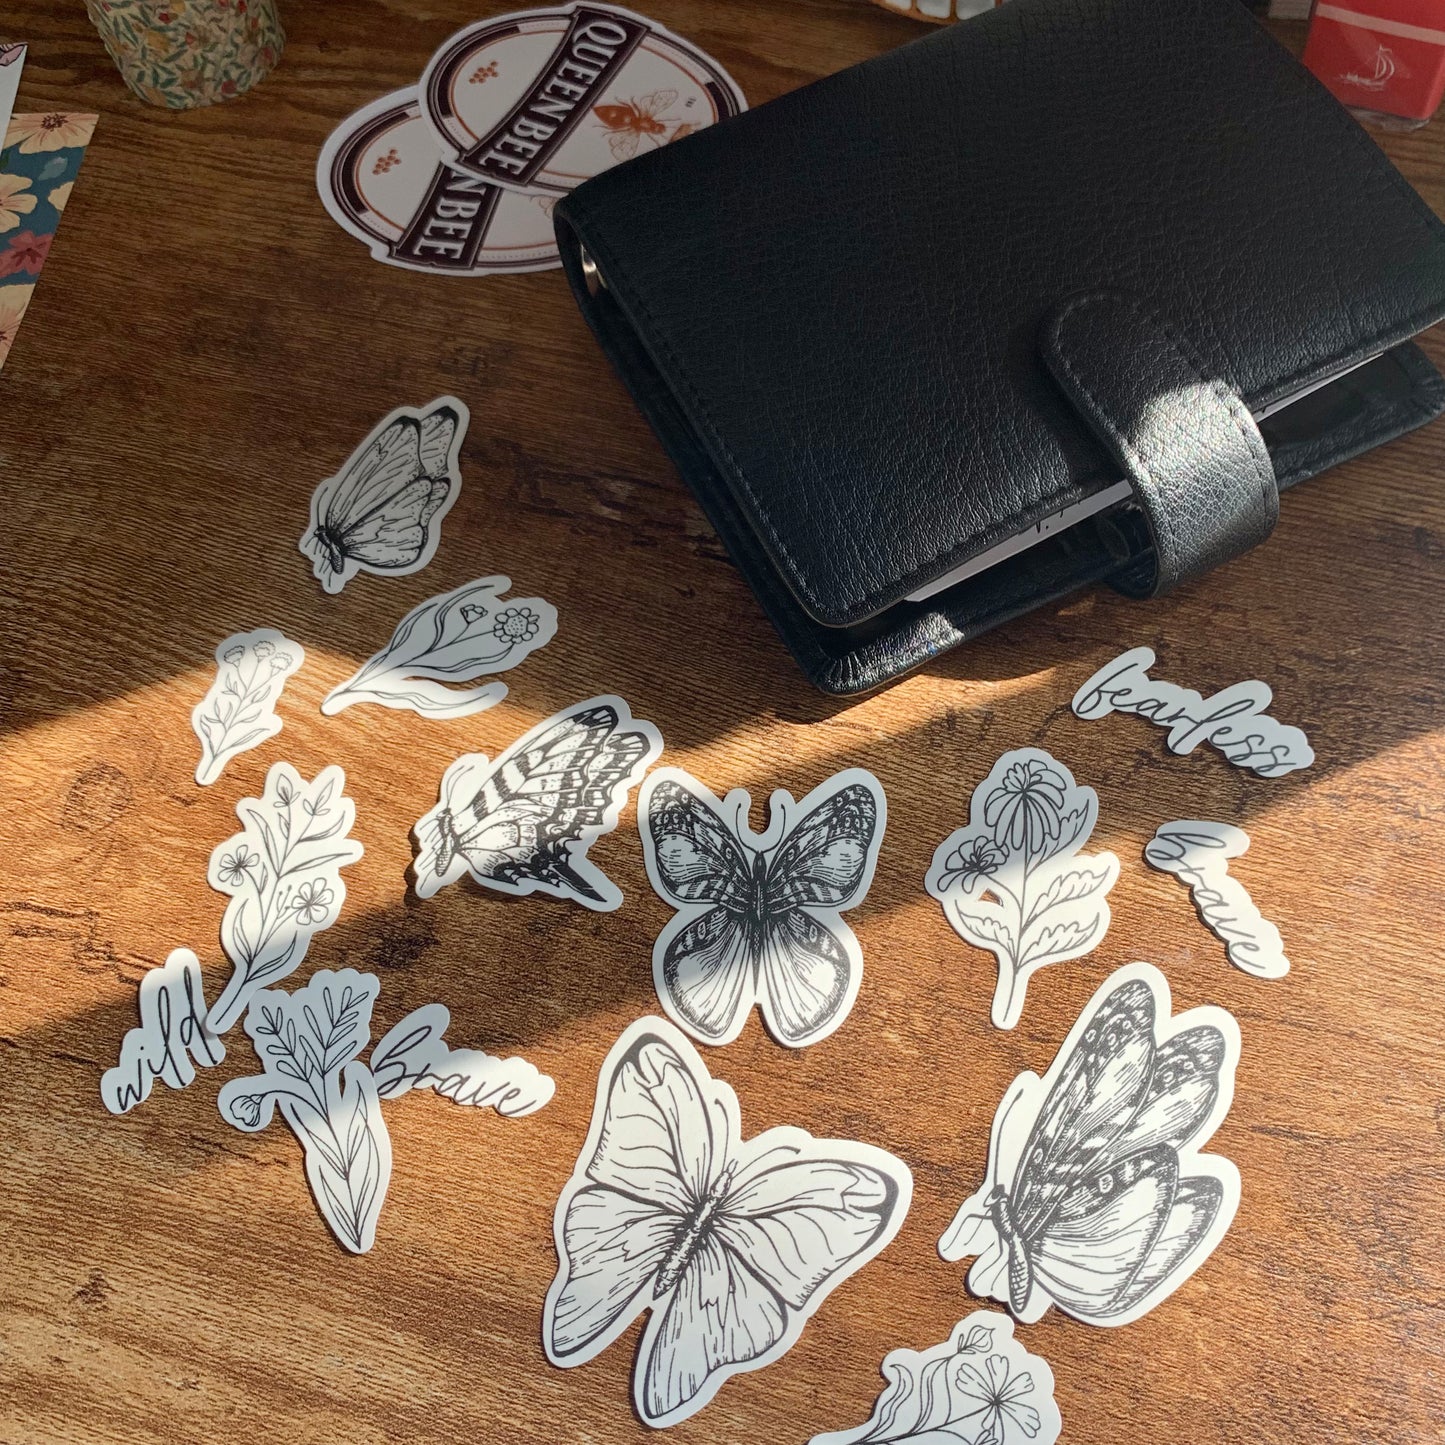 Sketch Butterflies & Floral Sticker Flakes - Pack of 15